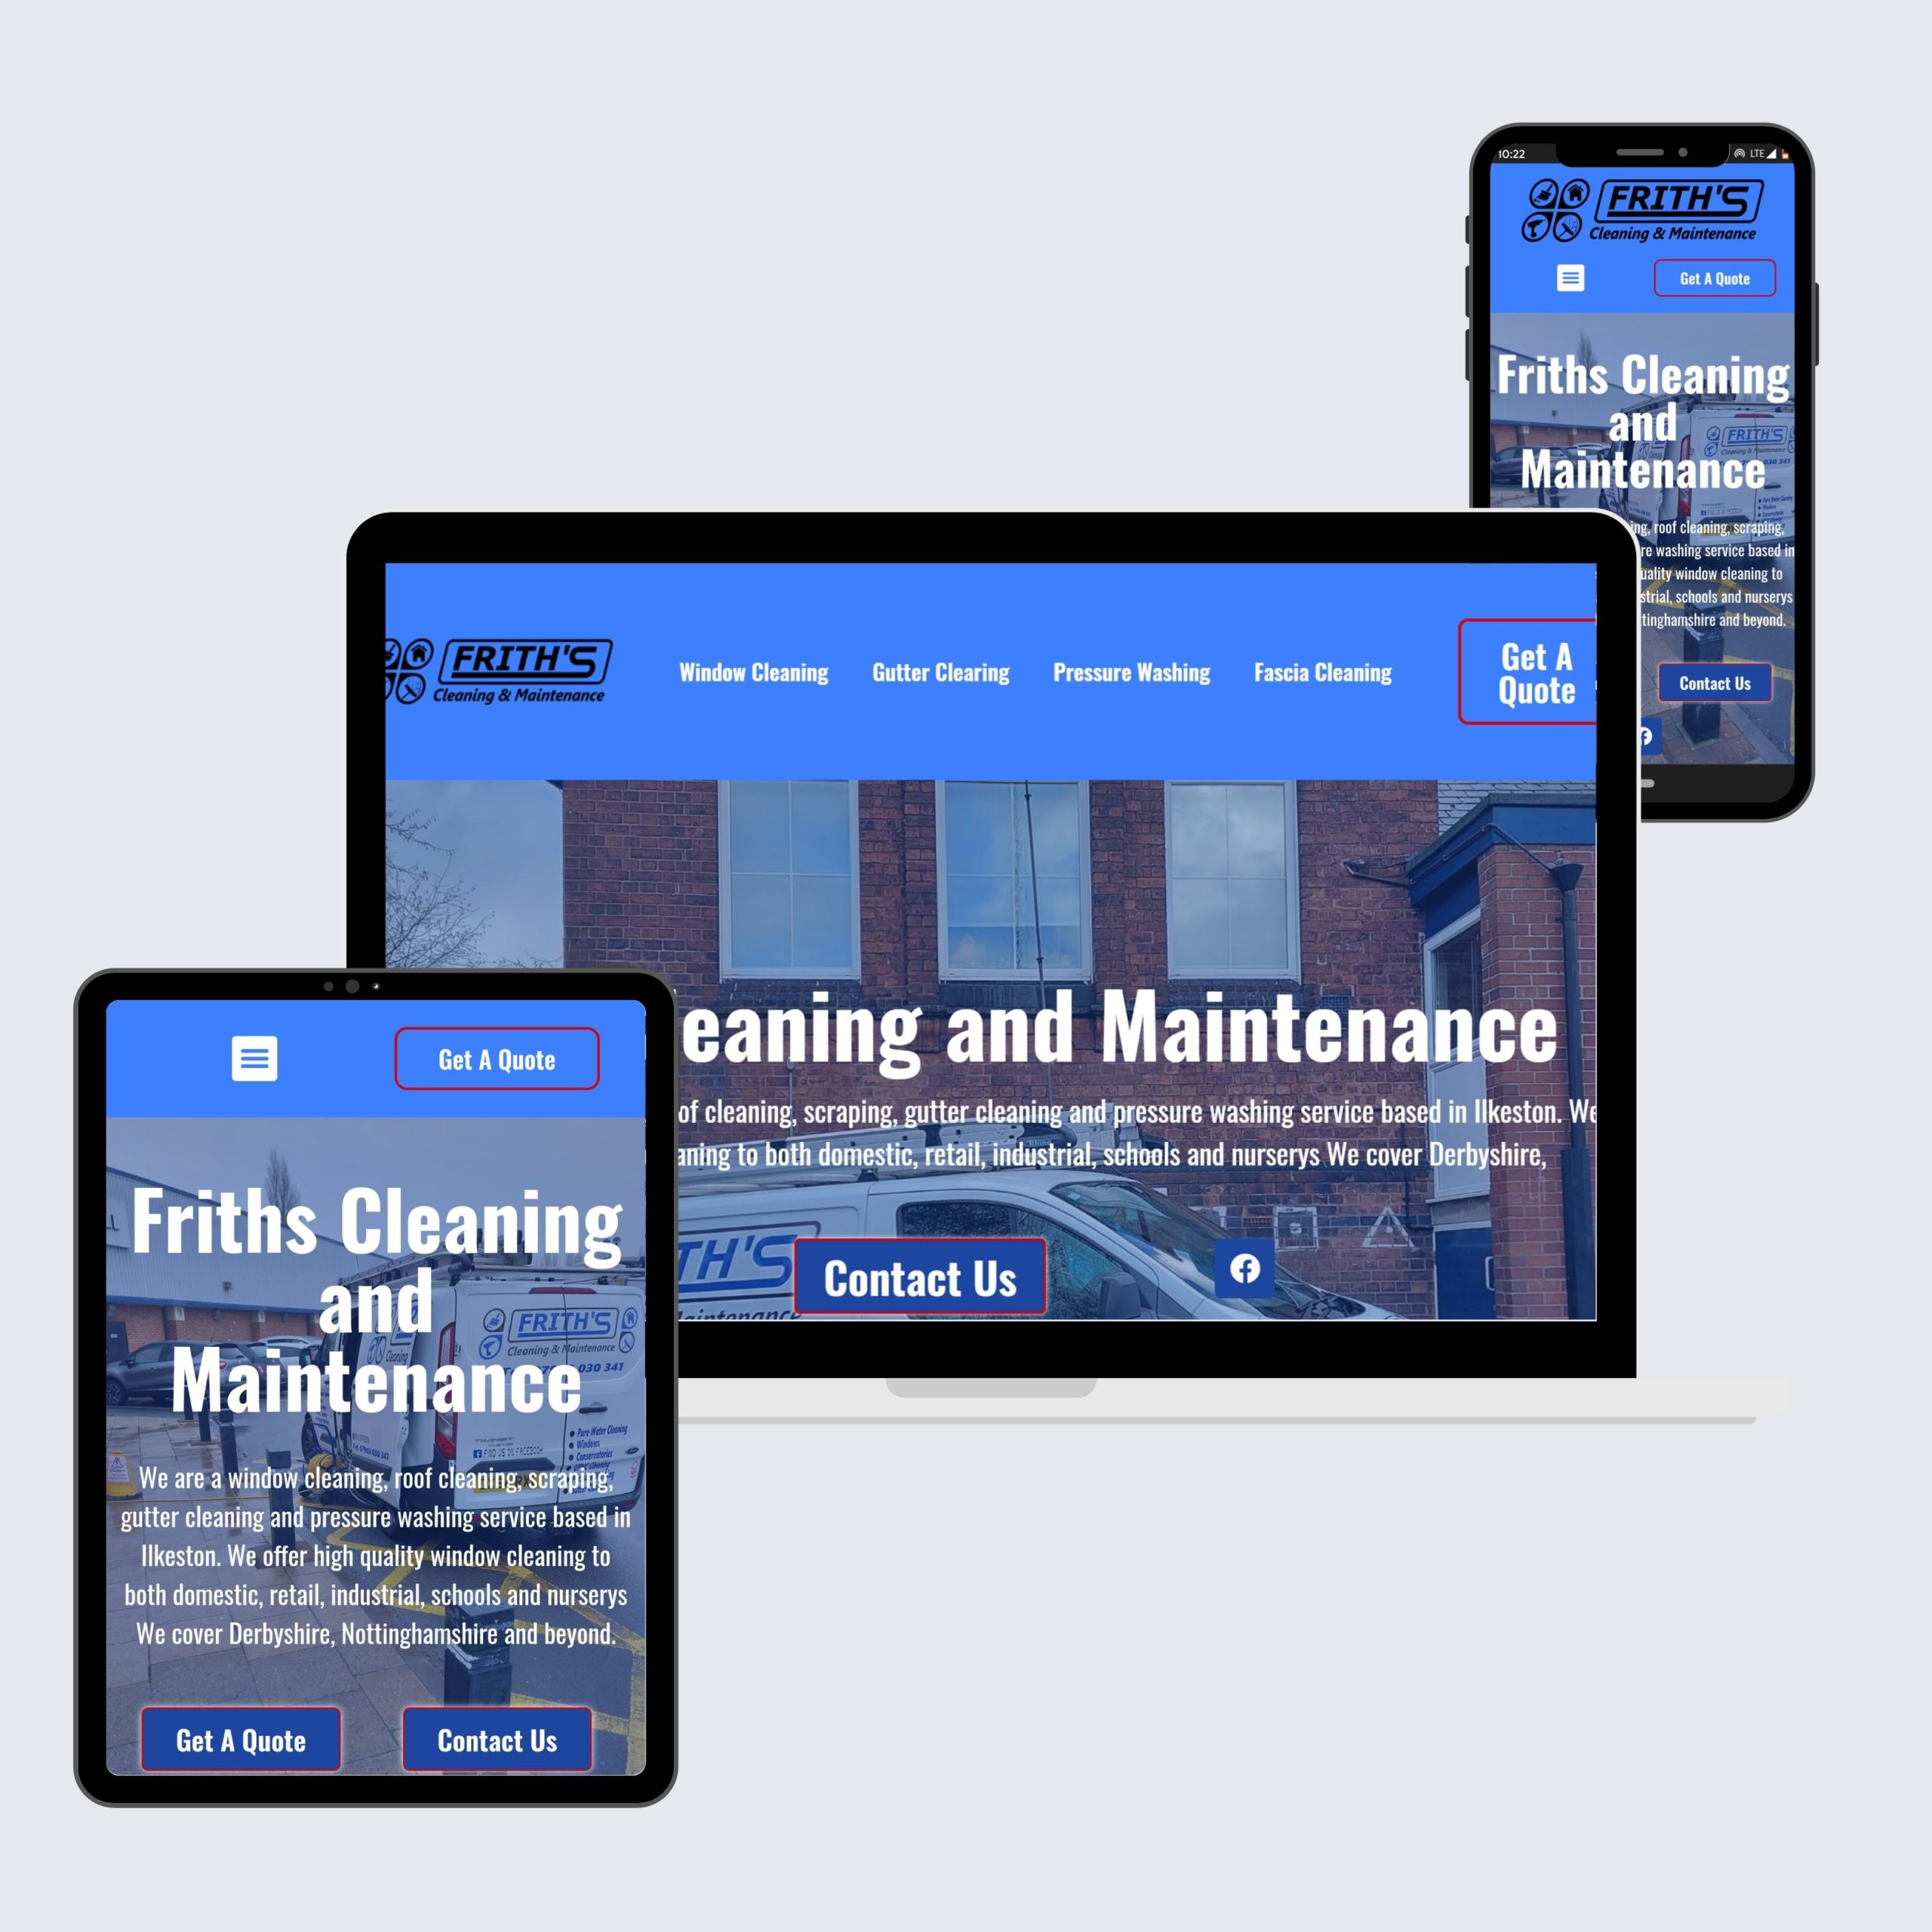 Frith's Cleaning and Maintenance